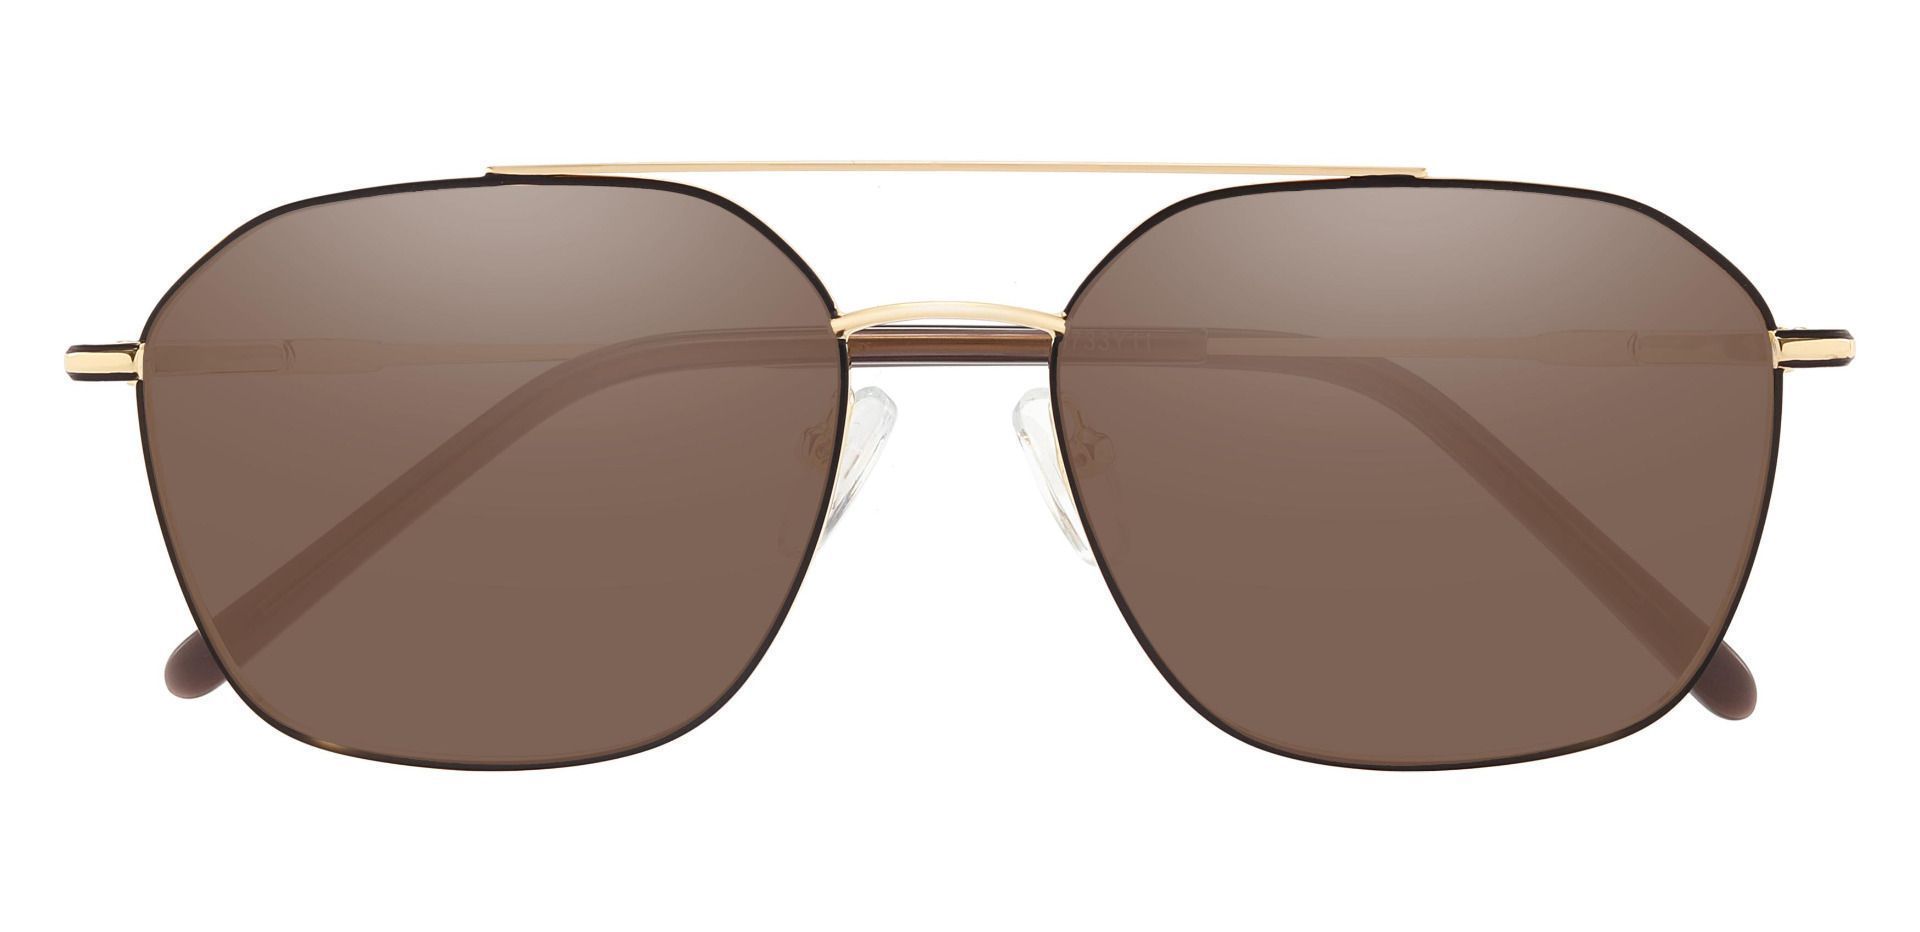 Harvey Aviator Non-Rx Sunglasses - Gold Frame With Brown Lenses